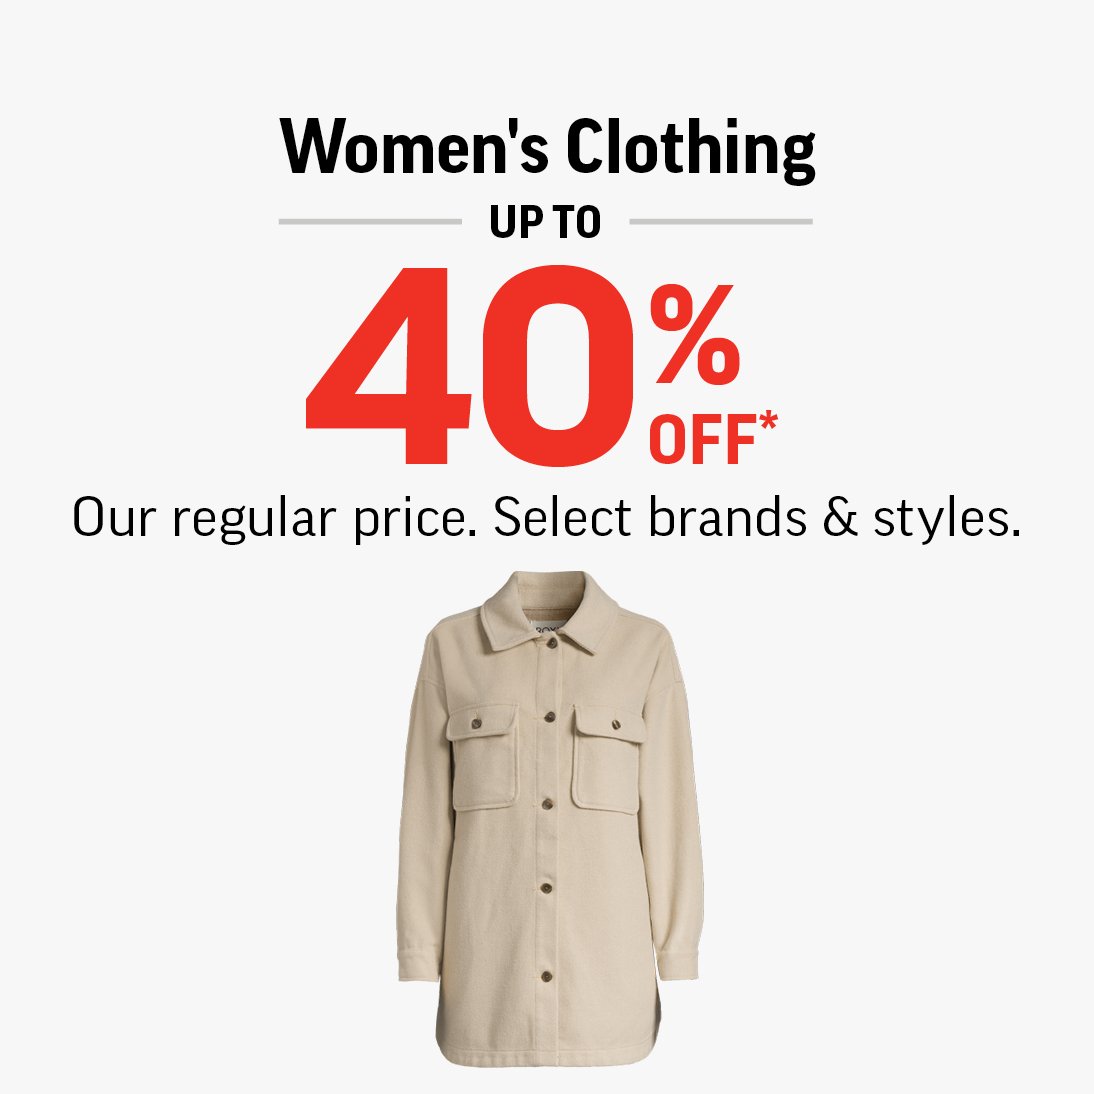 WOMEN'S CLOTHING UP TO 40% OFF